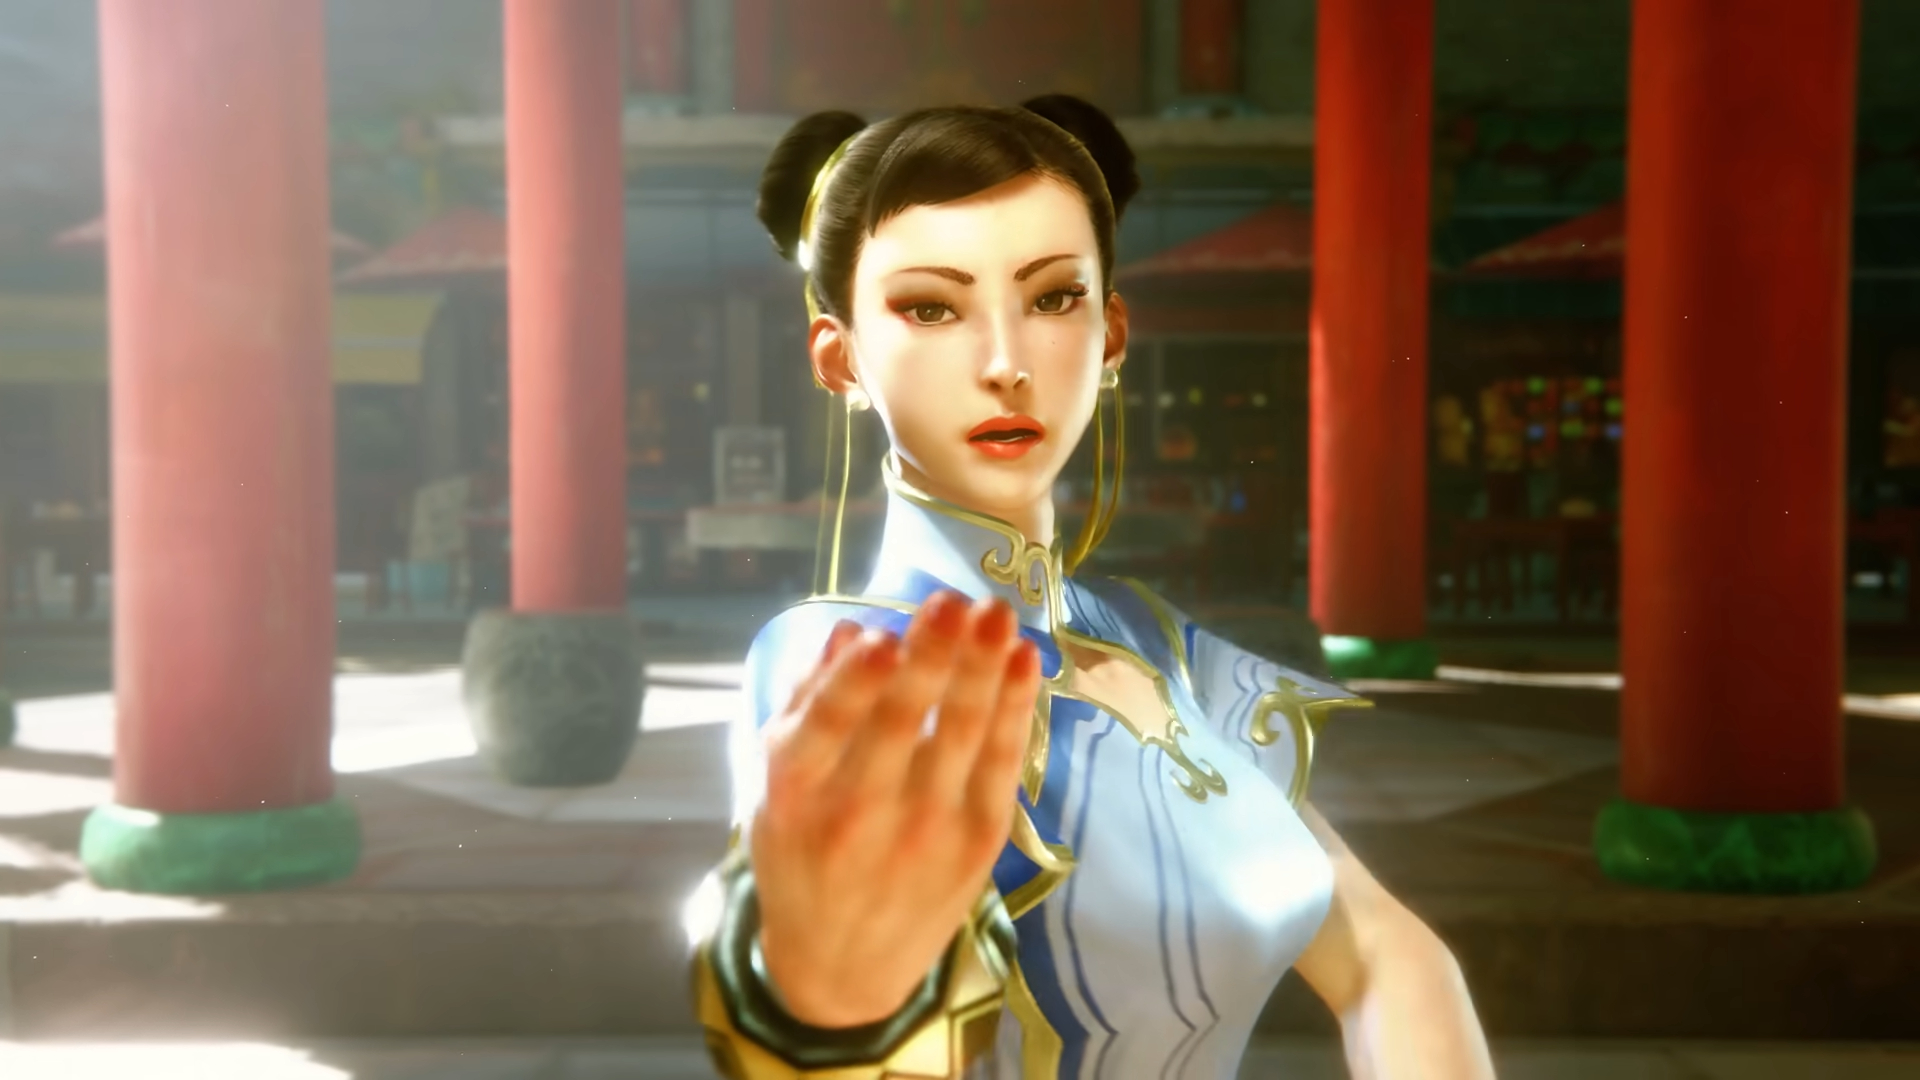 Fascinating Details You Missed In Guile's Street Fighter VI Reveal Trailer